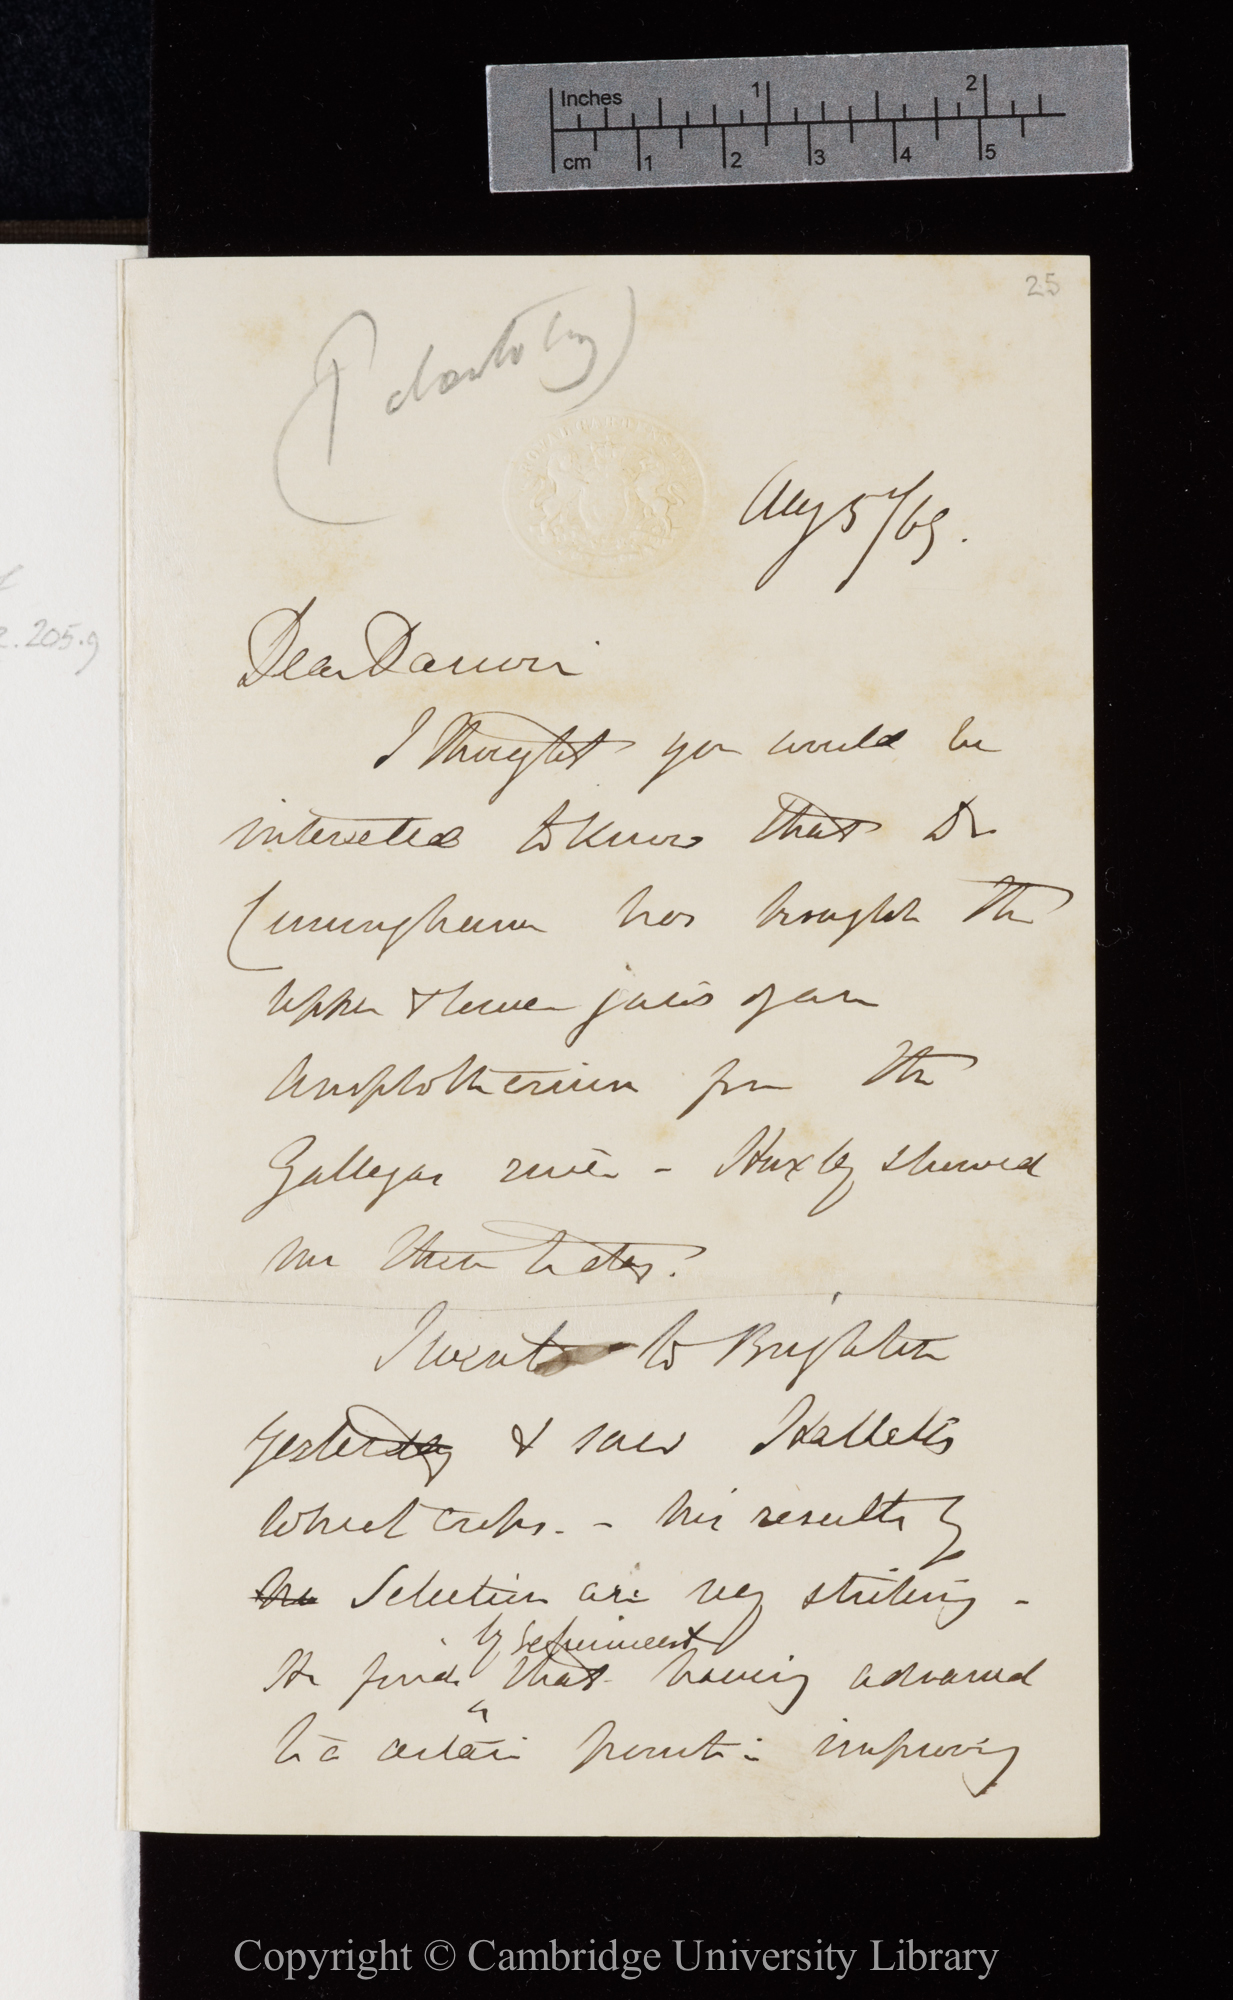 Letter from J. D. Hooker to C. R. Darwin   5 August 1869